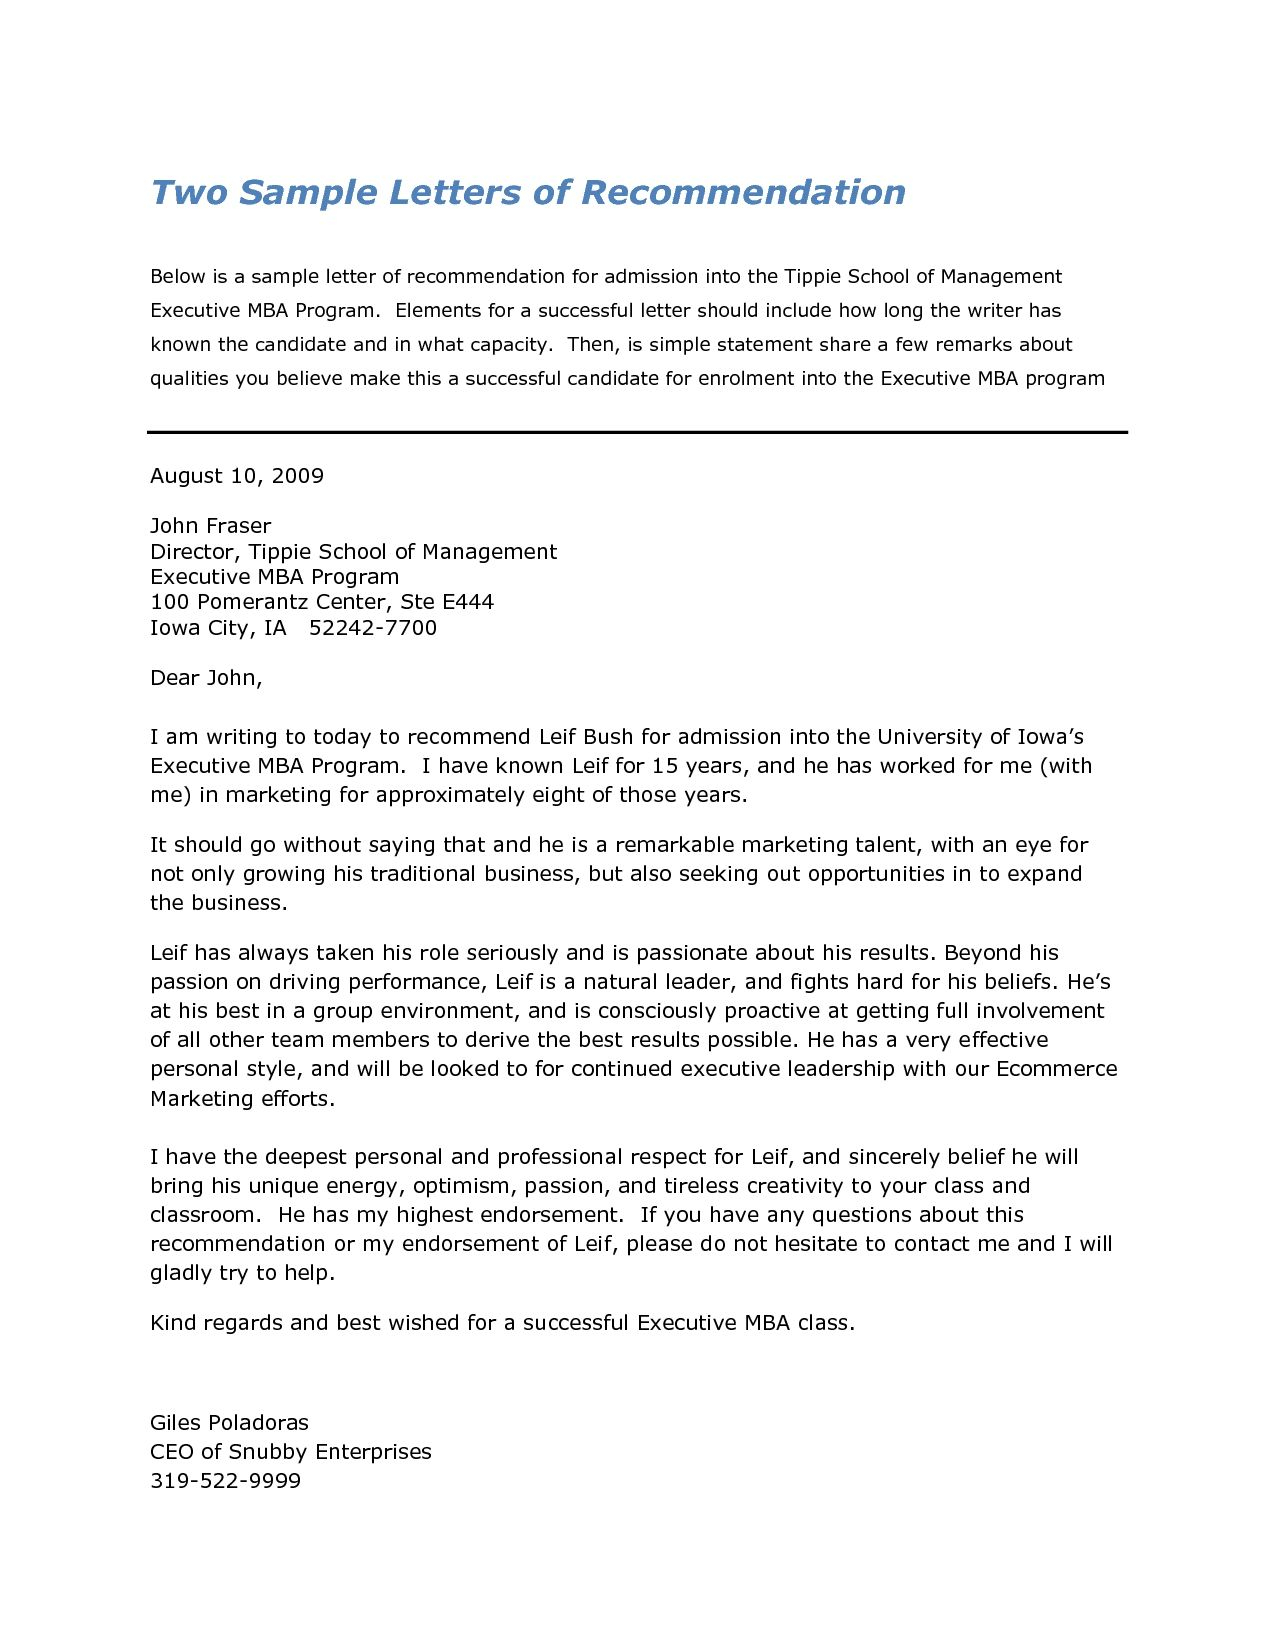 Letter Of Recommendation For Mba Debandje within dimensions 1275 X 1650